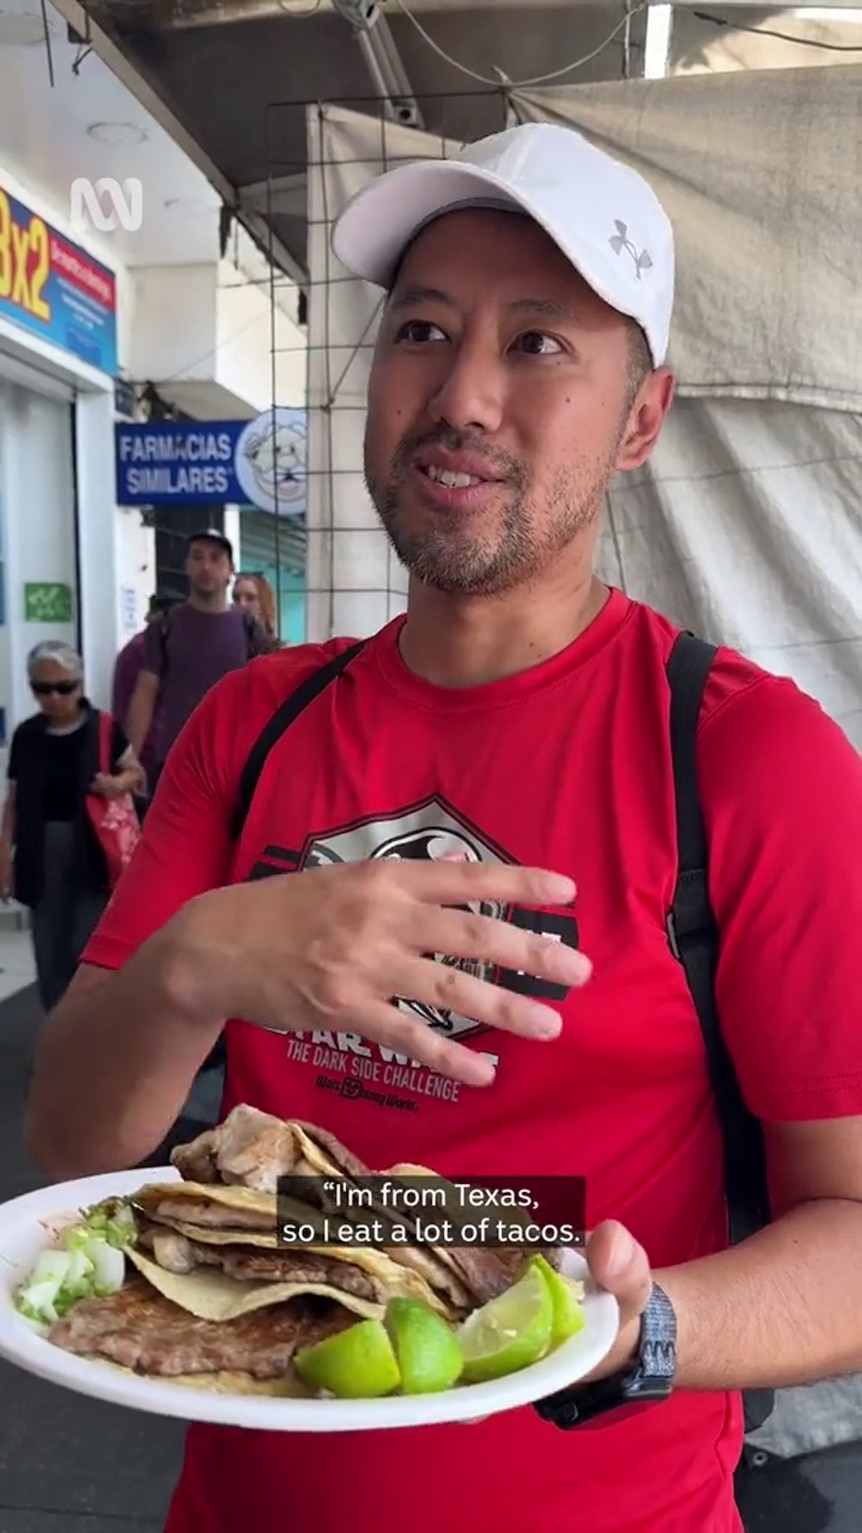 A man with medium-tone skin, dressed in a white cap and red T-shirt holds a plat with tacos and lime on it